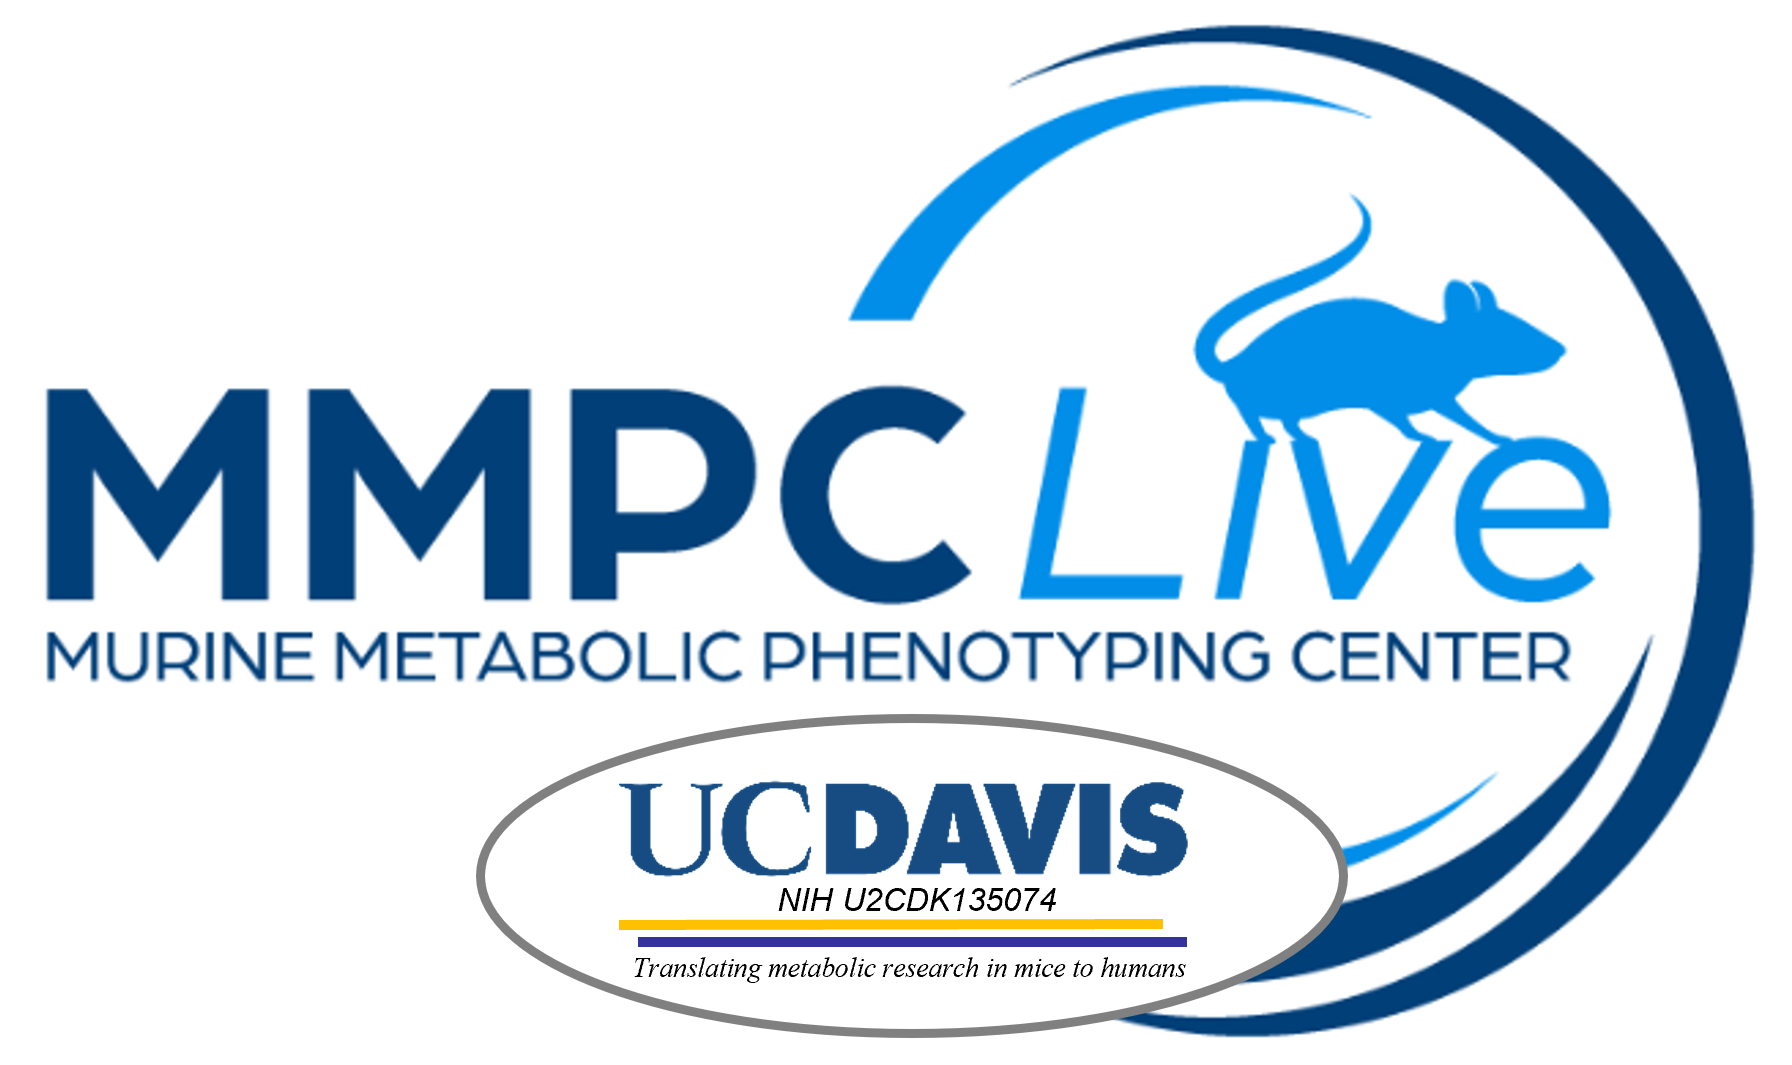 MMPC - Mouse Metabolic Phenotyping Center